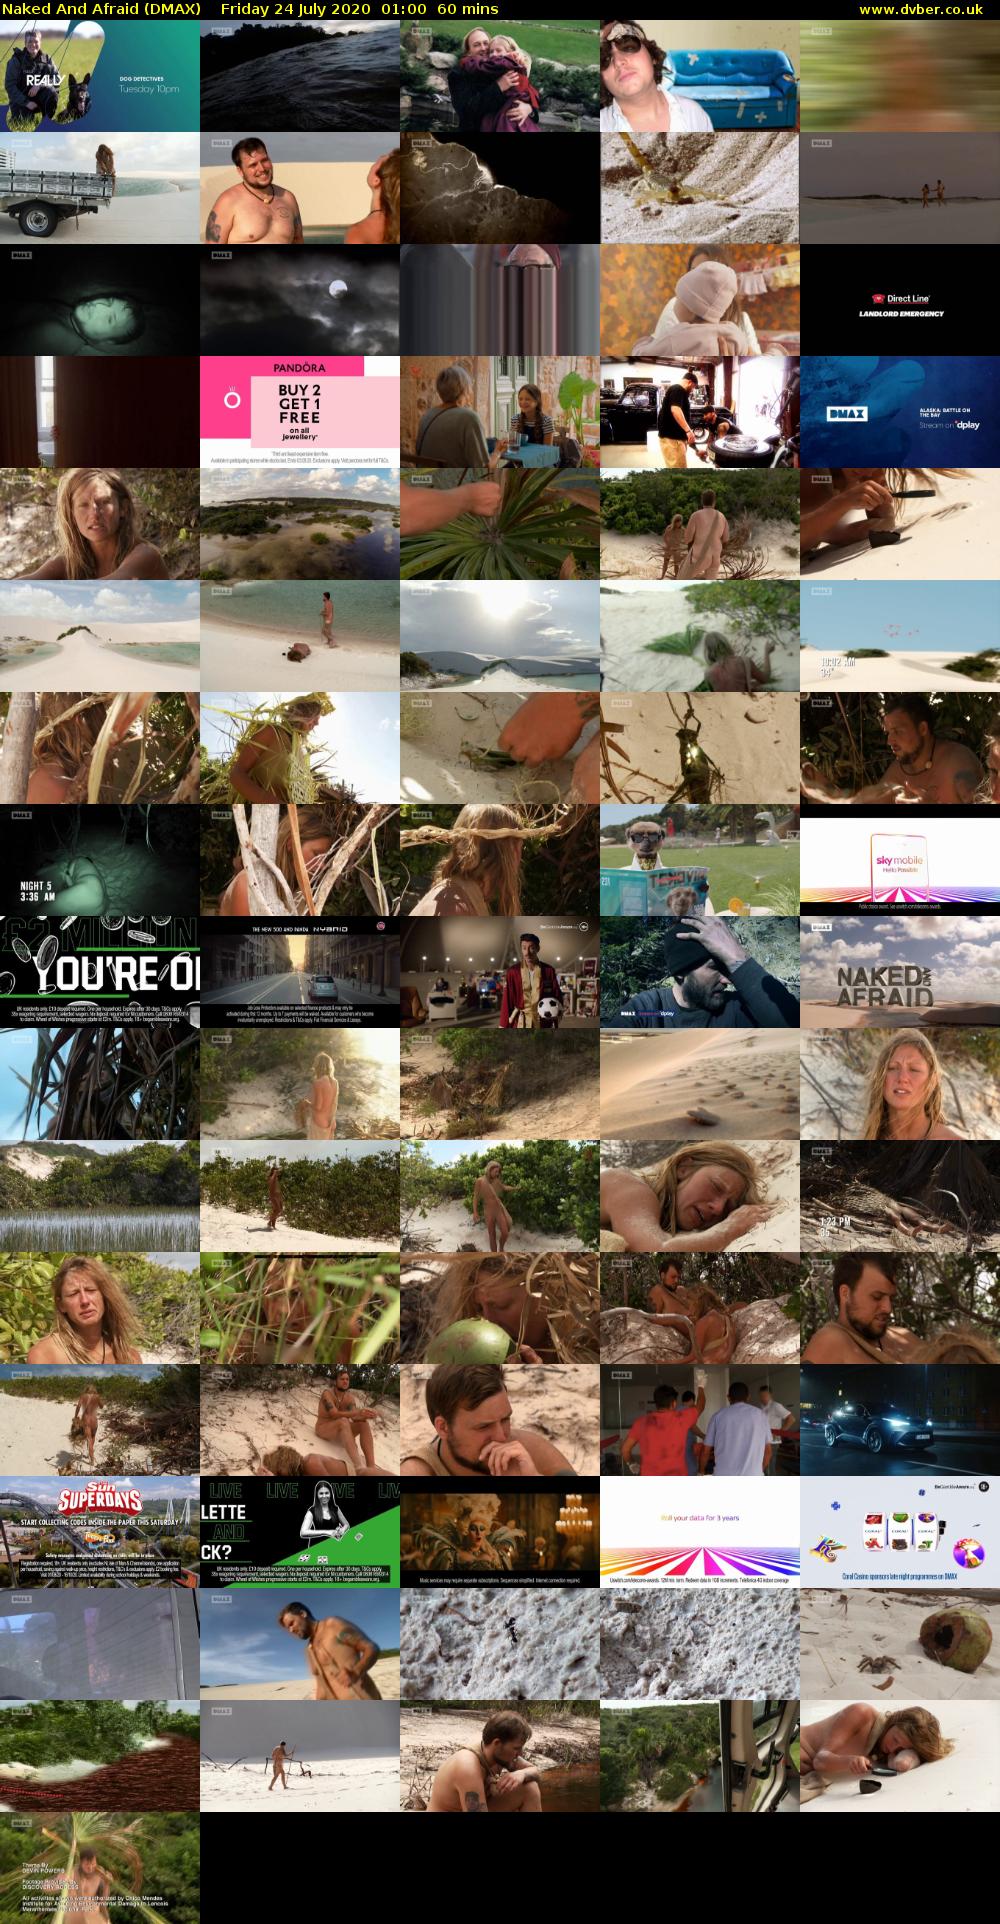 Naked And Afraid (DMAX) Friday 24 July 2020 01:00 - 02:00